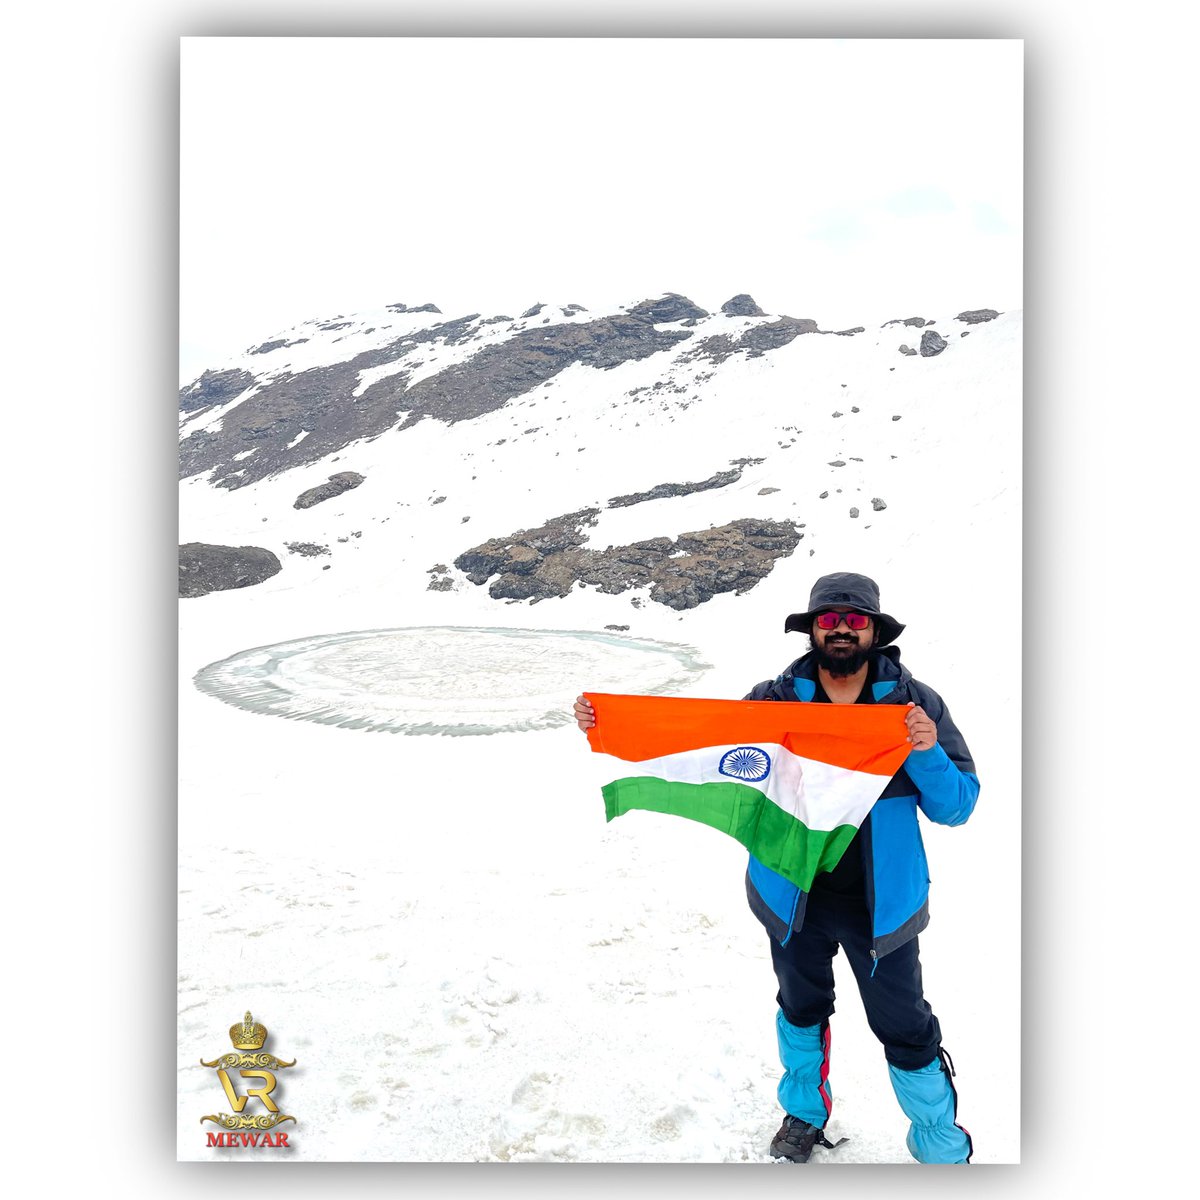 Get ready for 'Bhrigu lake summit' 
height of (14,107 ft)

For the year 2022,First summit of Brighu lake trek done in great way.